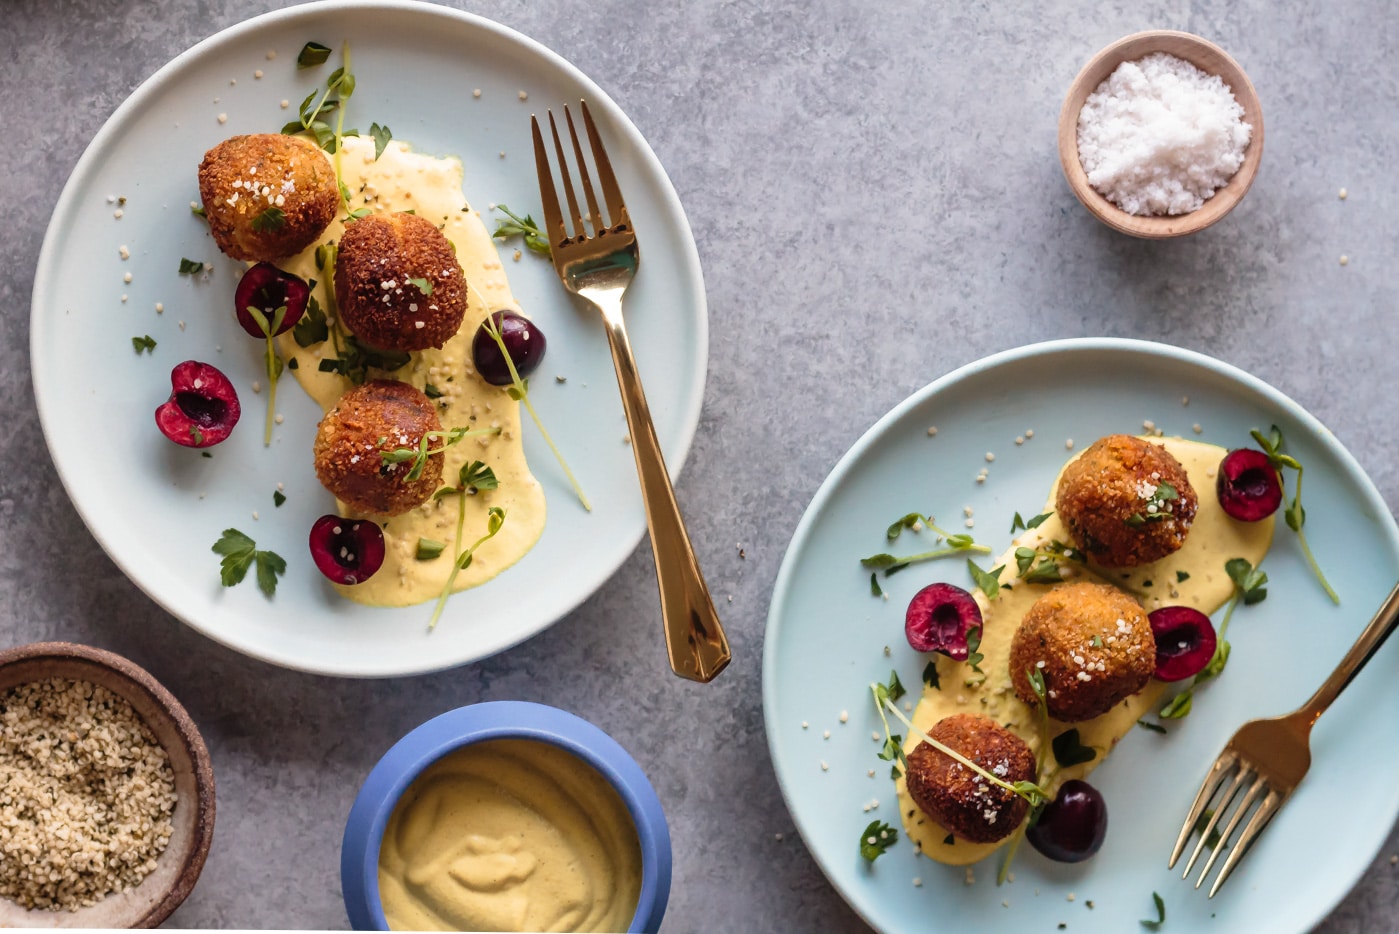 Vegan Lentil Sweet Potato Fritters served with curried cashew cream and fresh cherries